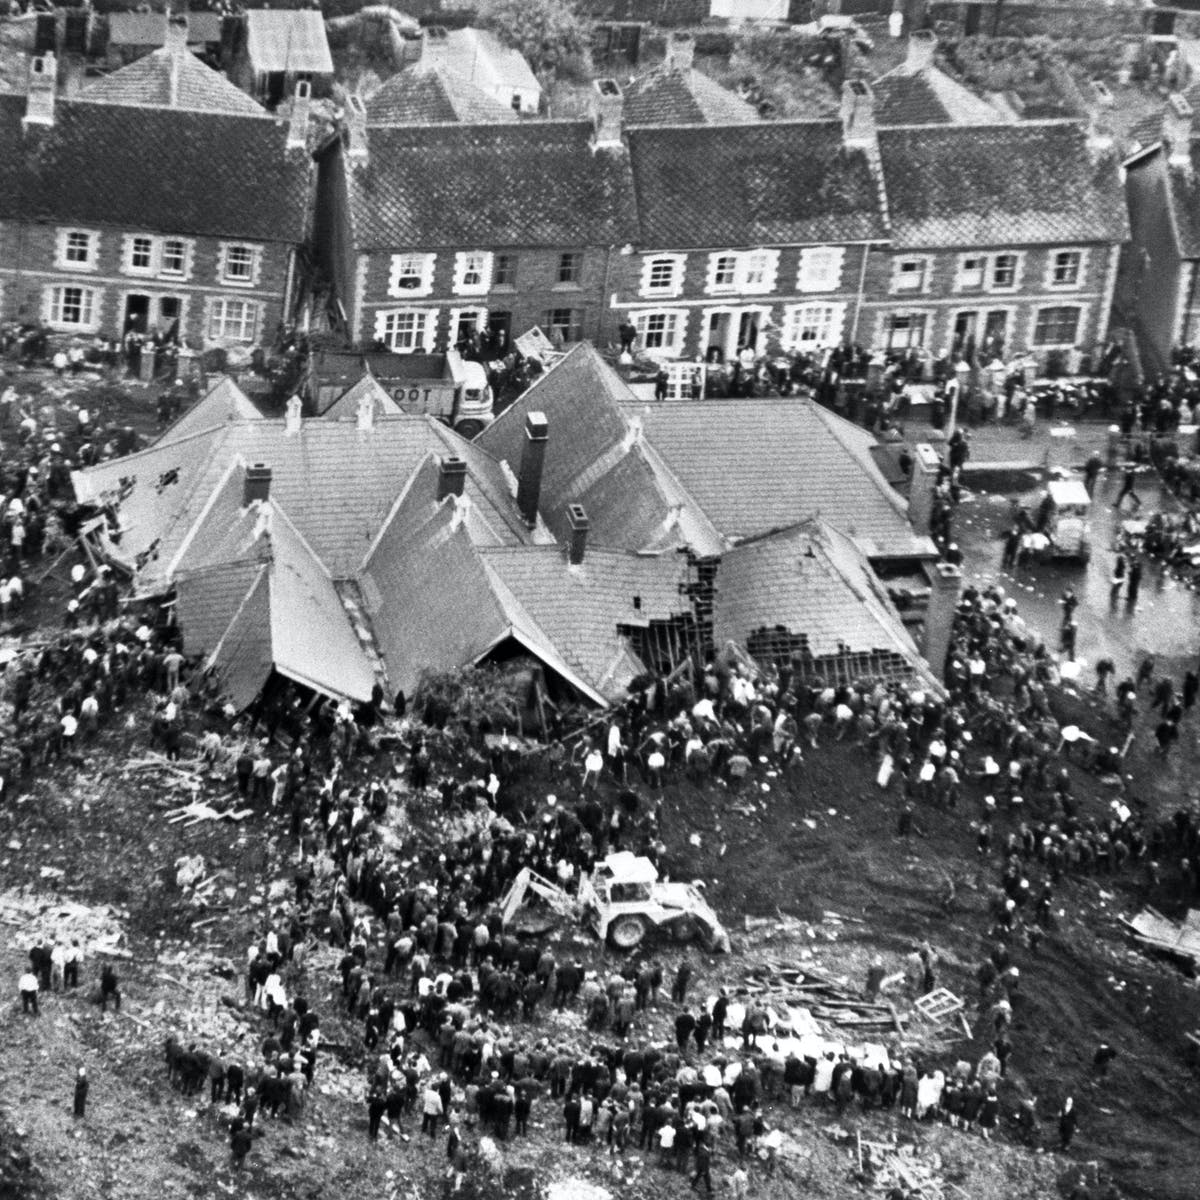 In October 1966, Jenkins watched TV news broadcasts of the Aberfan disaster. A spoil tip situated above the town had collapsed, sending a cascade of slurry towards Aberfan. It engulfed a local primary school and killed 144 people, most of whom were children at the school.